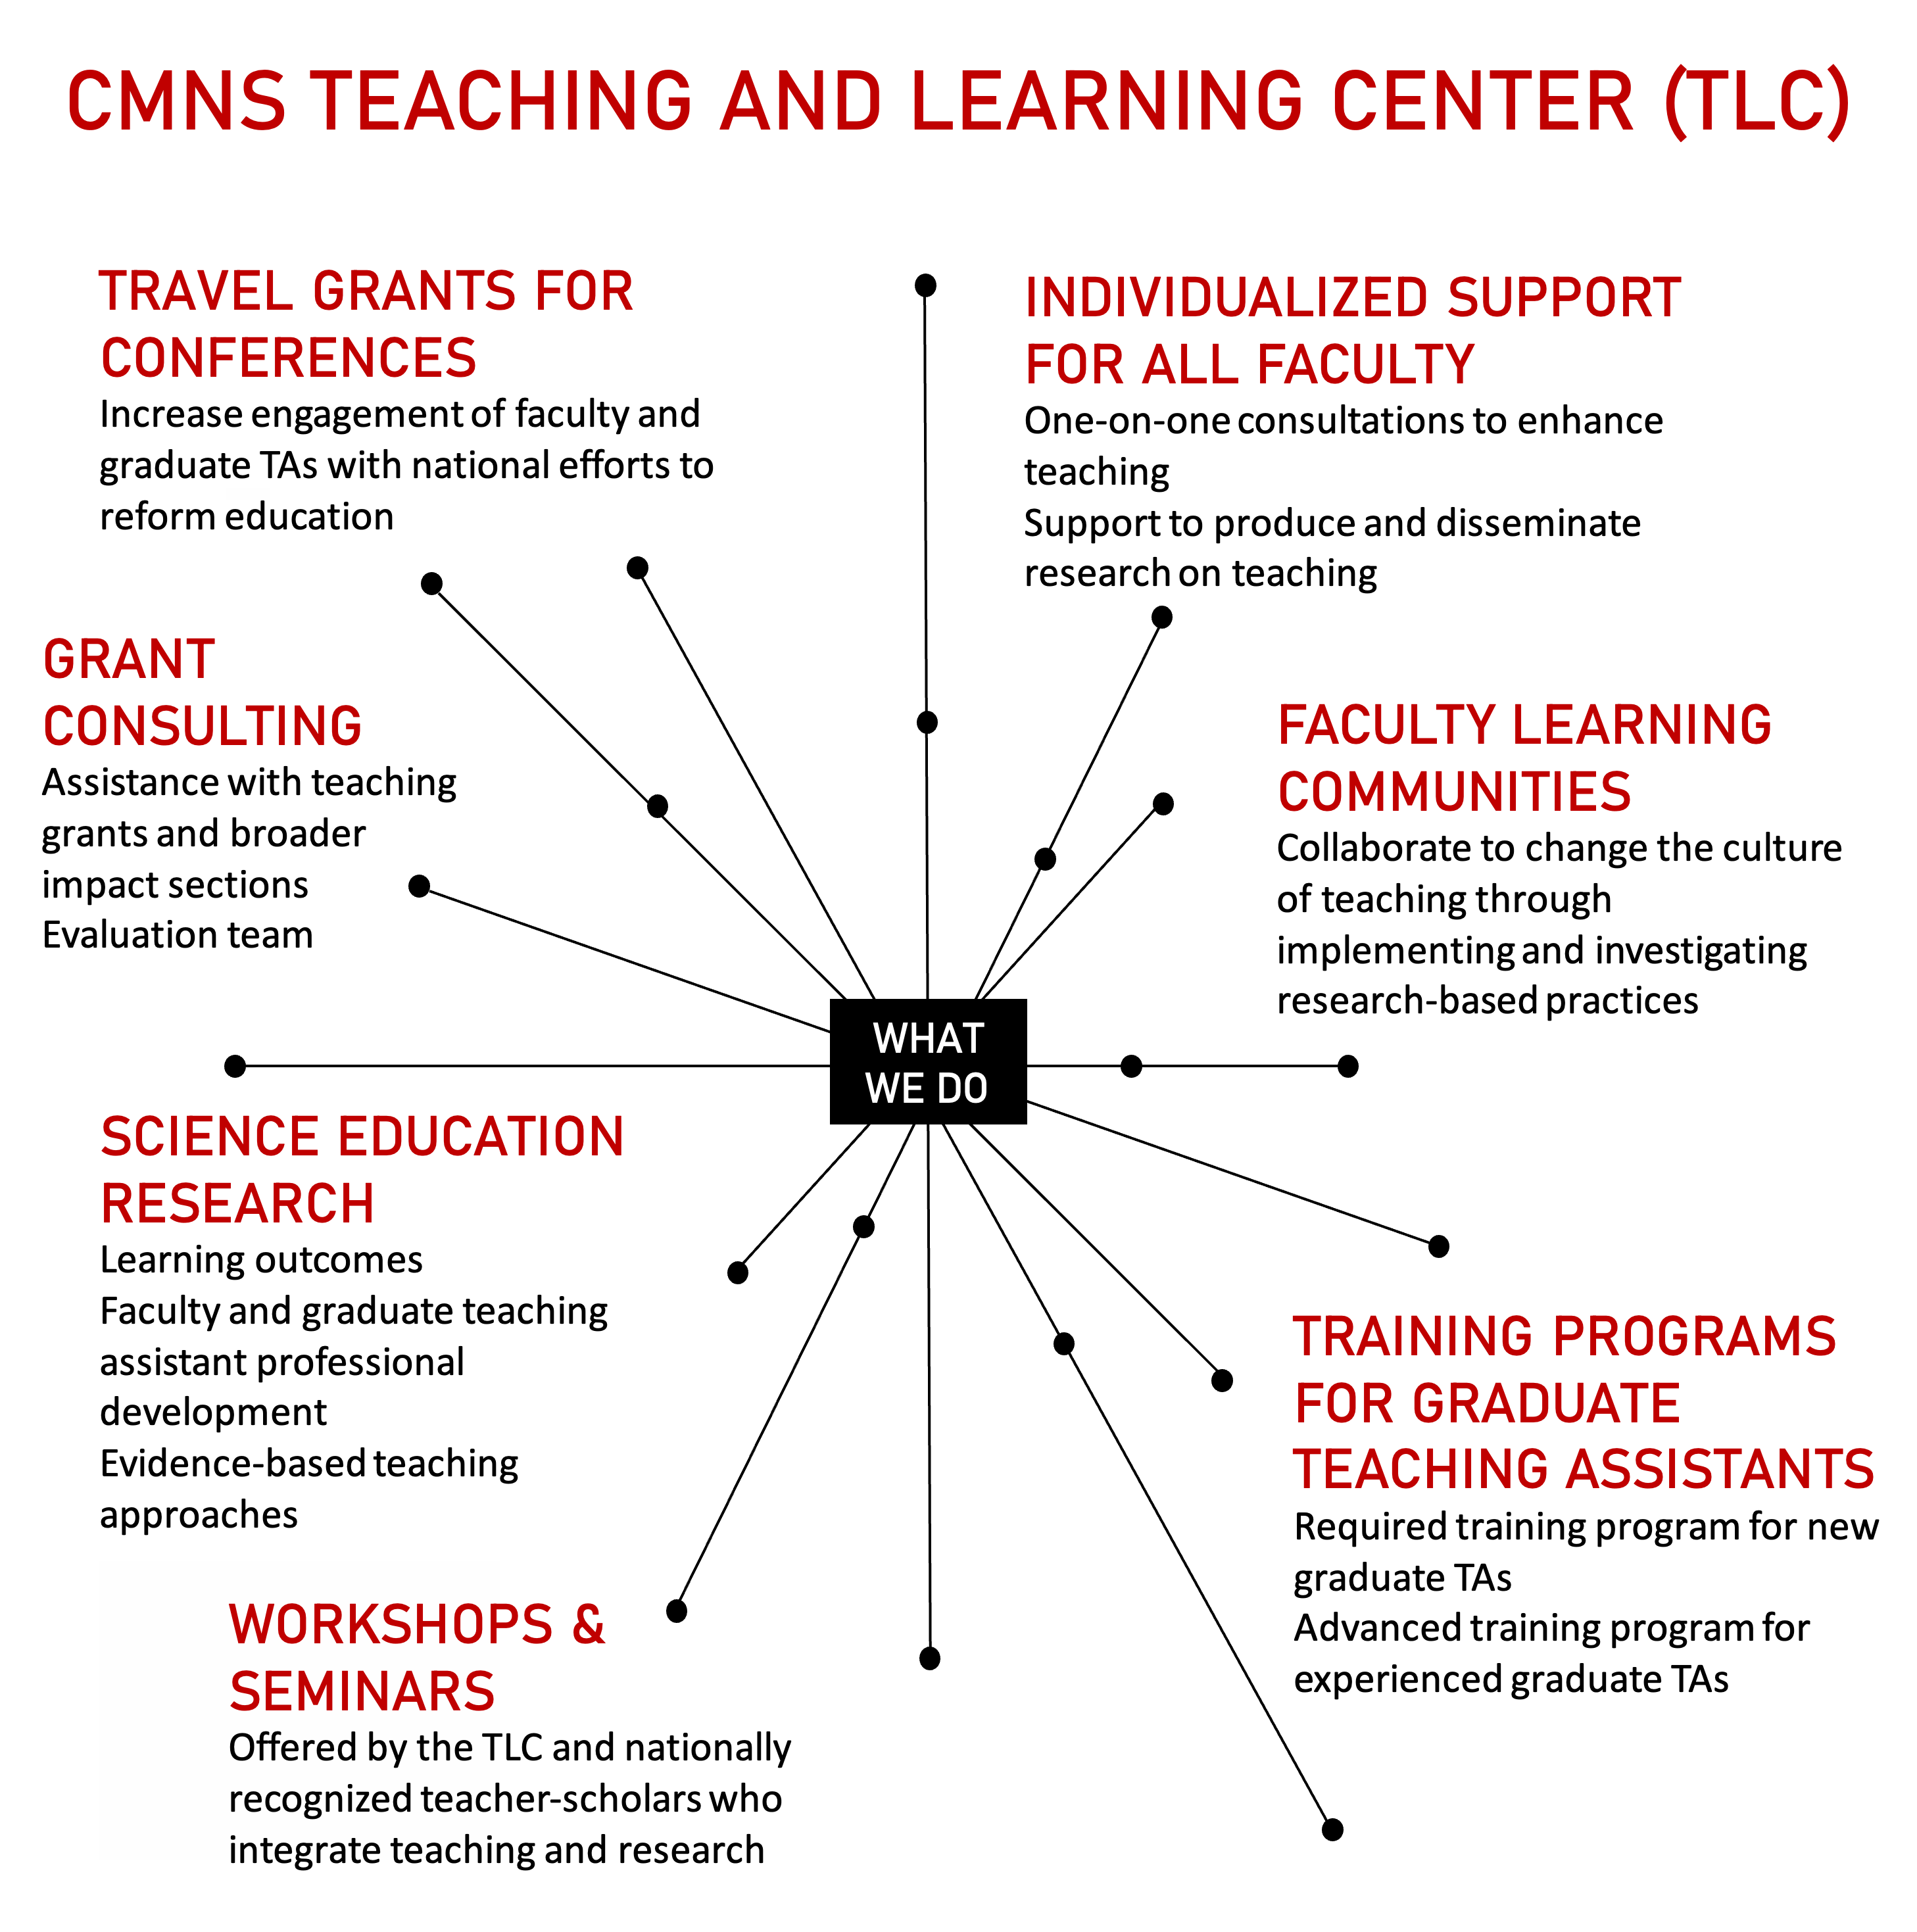 The CMNS TLC offers travel grants for conferences, individualized support for all faculty, grant consulting, faculty learning communities, science education research, workshops and seminars, and training programs for graduate teaching assistants. Click image to download hi-res version.